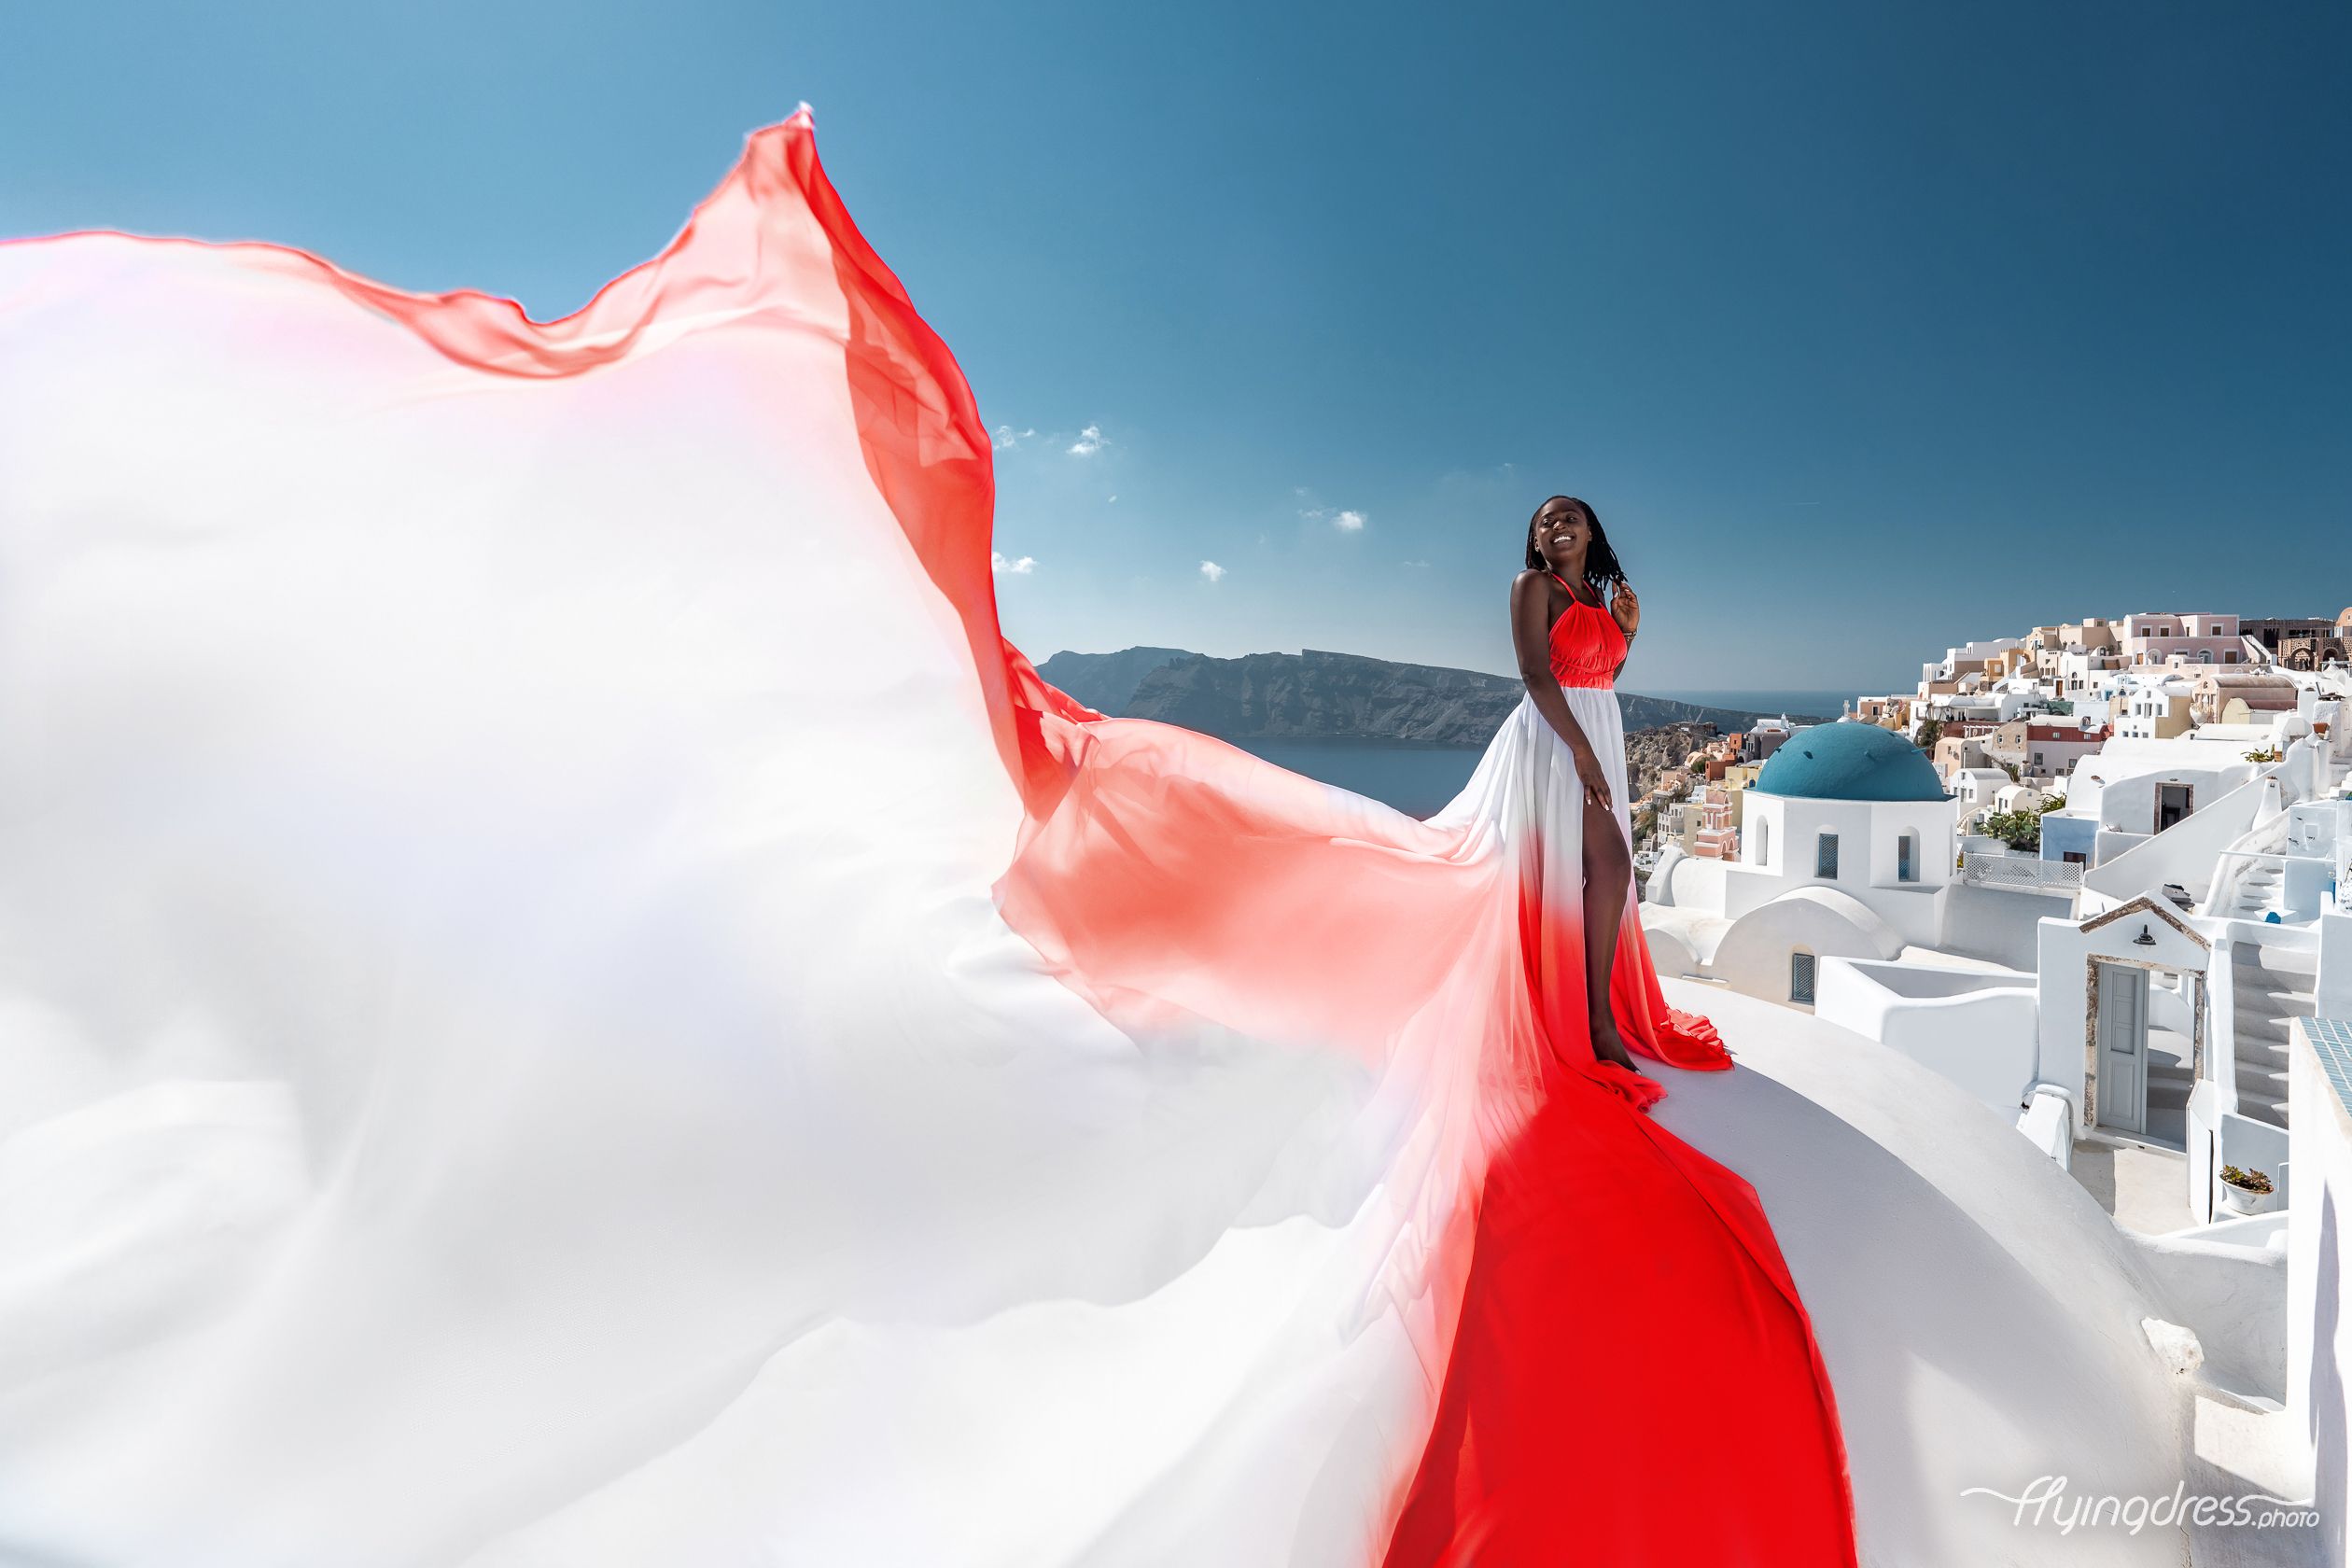 Red and white ombre flying dress photoshoot in Oia village, Santorini